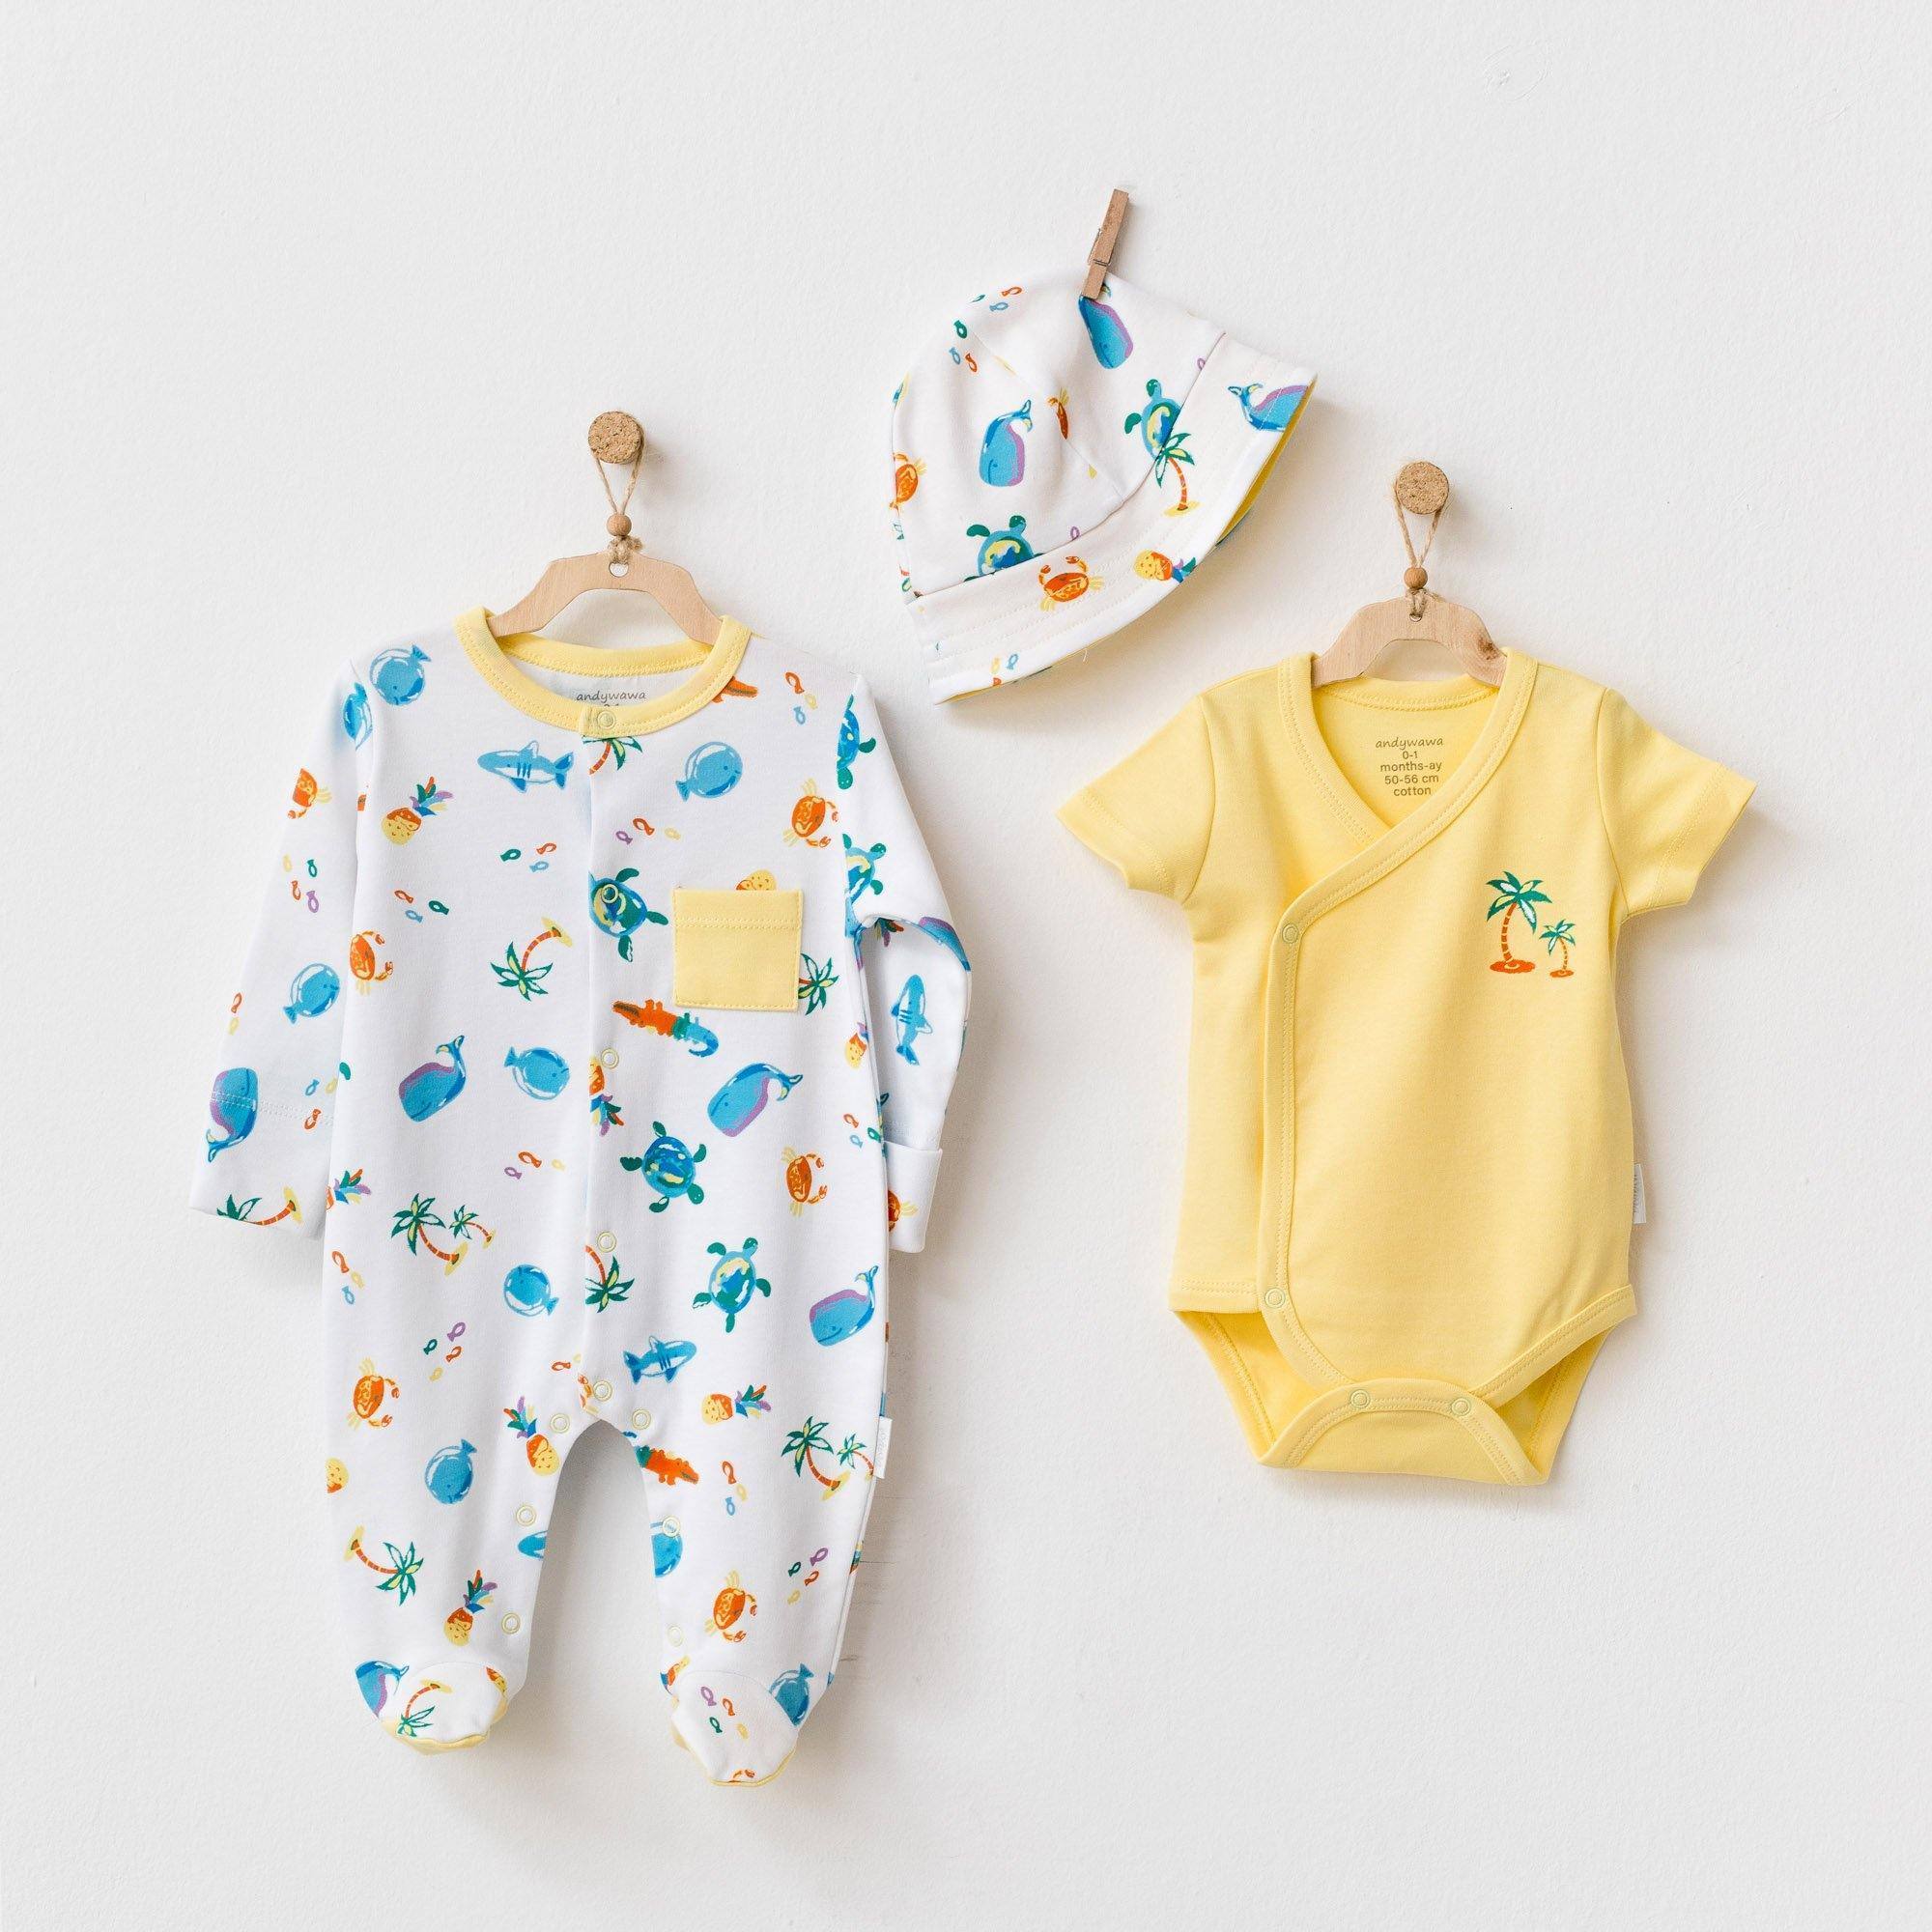 Play Time - 3 Pieces Pajama Bodysuit Hat Set - Play Time - 3 Pieces Pajama Bodysuit Hat Set - 0-3 Months - Andywawa - Melymod